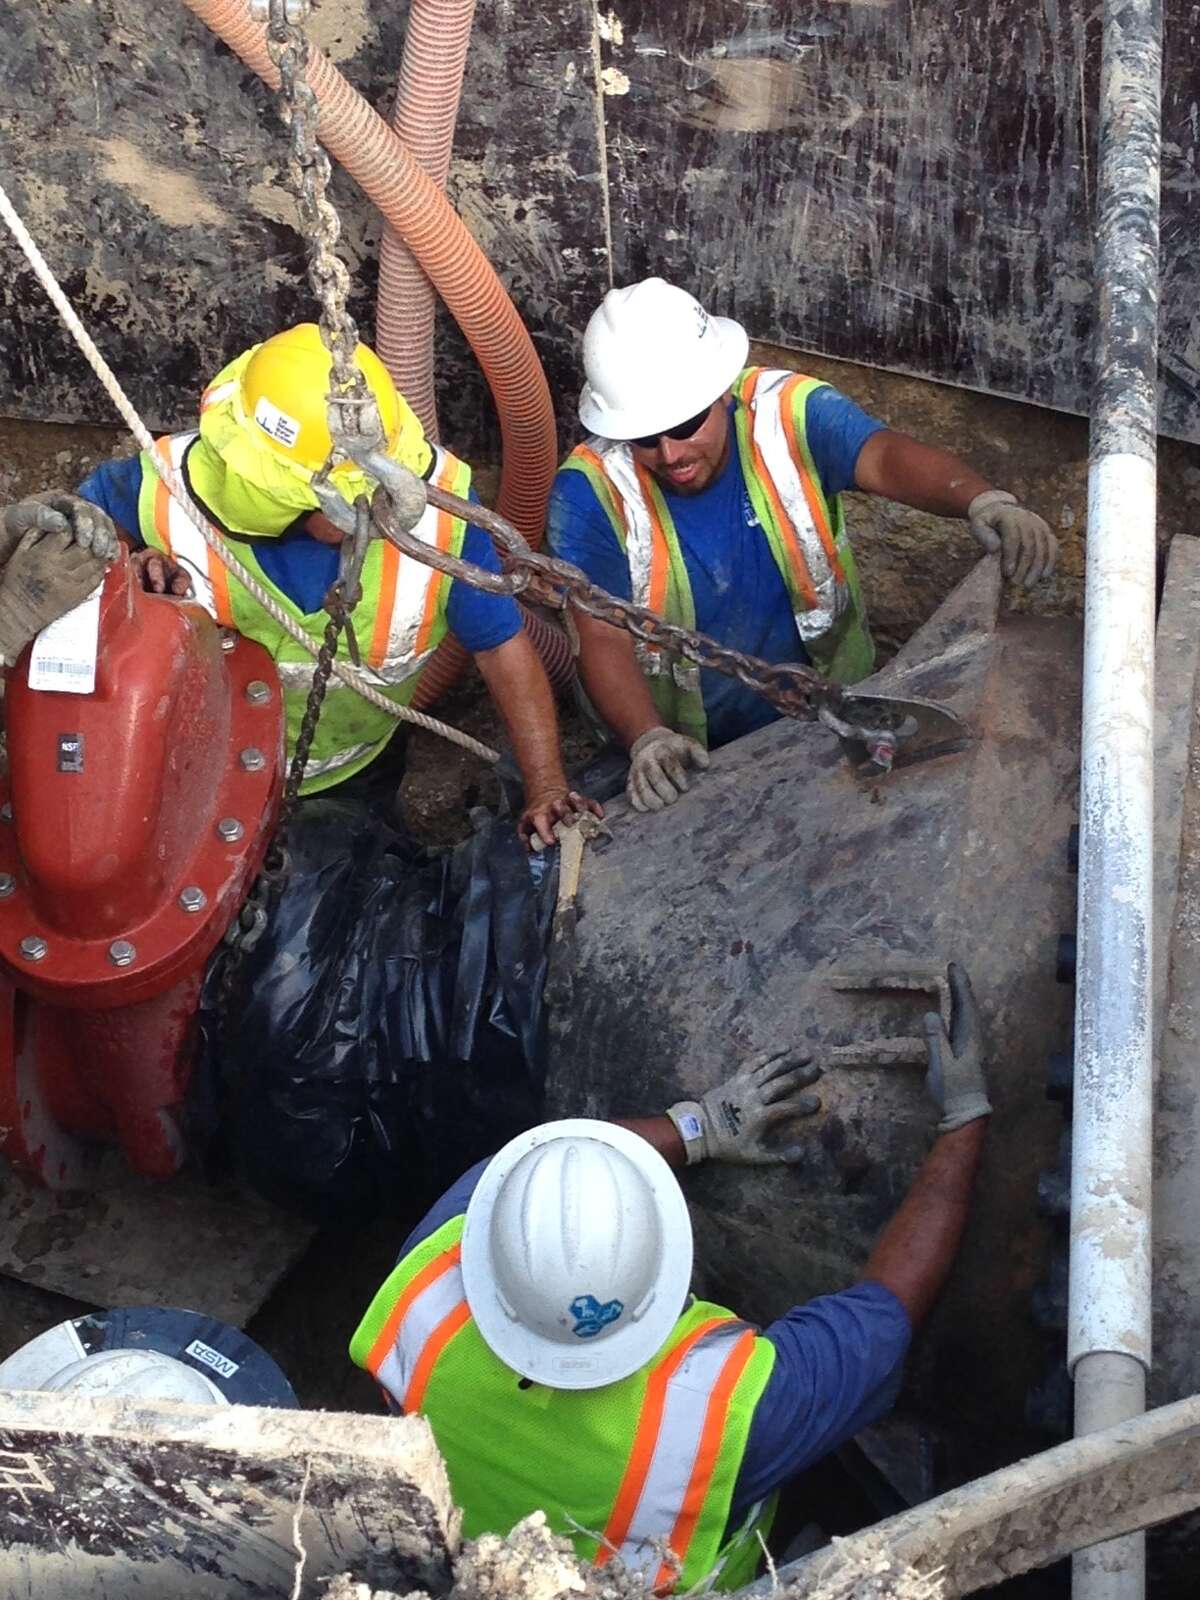 A San Antonio Water System crew works on repairs to a 48-inch mainline connection that ruptured last week, leading SAWS officials to ban outdoor water use in the Stone Oak area until Thursday morning. The rupture to a former Bexar Metropolitan Water District pipeline at U.S. 281 and Bitters Road caused water pressure to plummet, requiring officials to impose the outdoor water ban. Officials needed to ship parts from H ouston to complete the repairs.